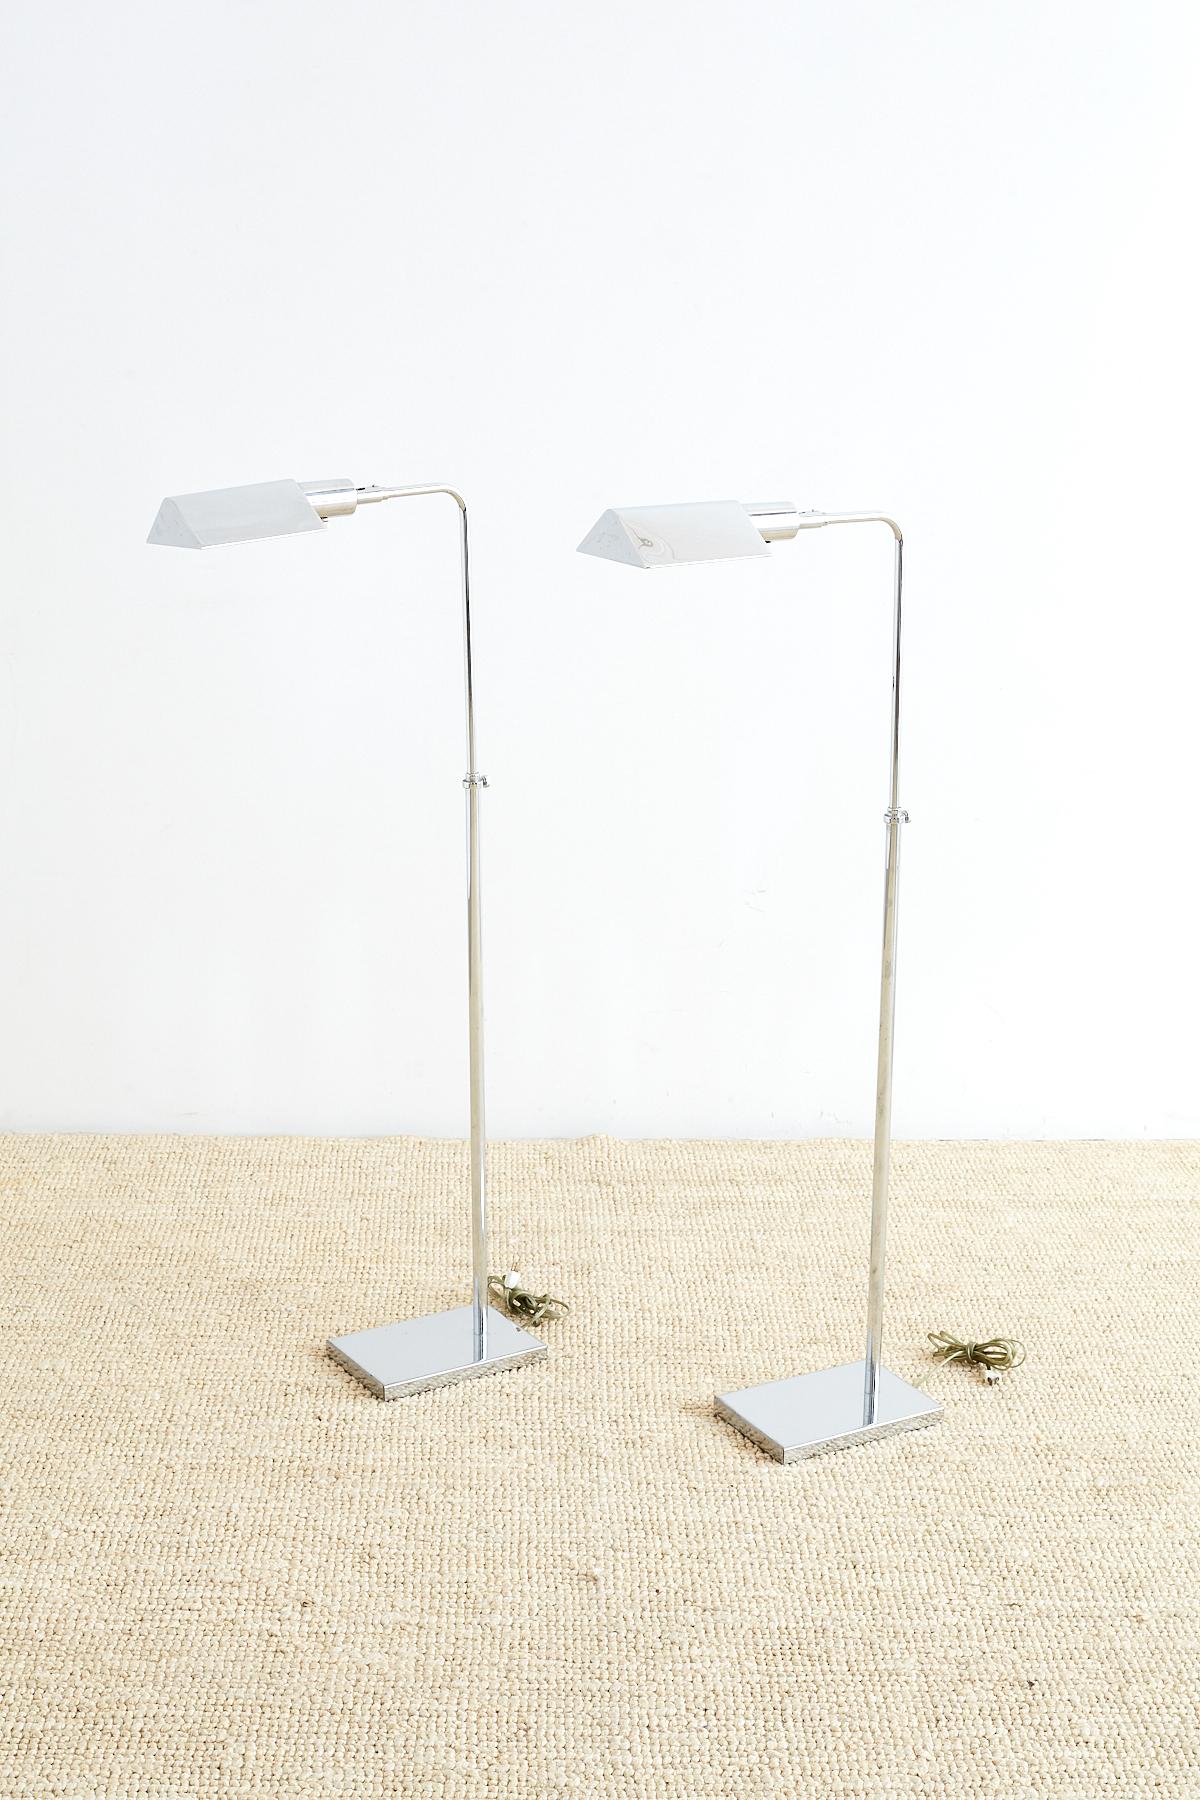 Mid-Century Modern pair of pharmacy floor lamps made in the manner and style of Cedric Hartman by Koch and Lowy's OMI lighting company. Featuring a brass metal construction with a chrome finish. Each lamp adjusts from 32 inches high to 45 inches